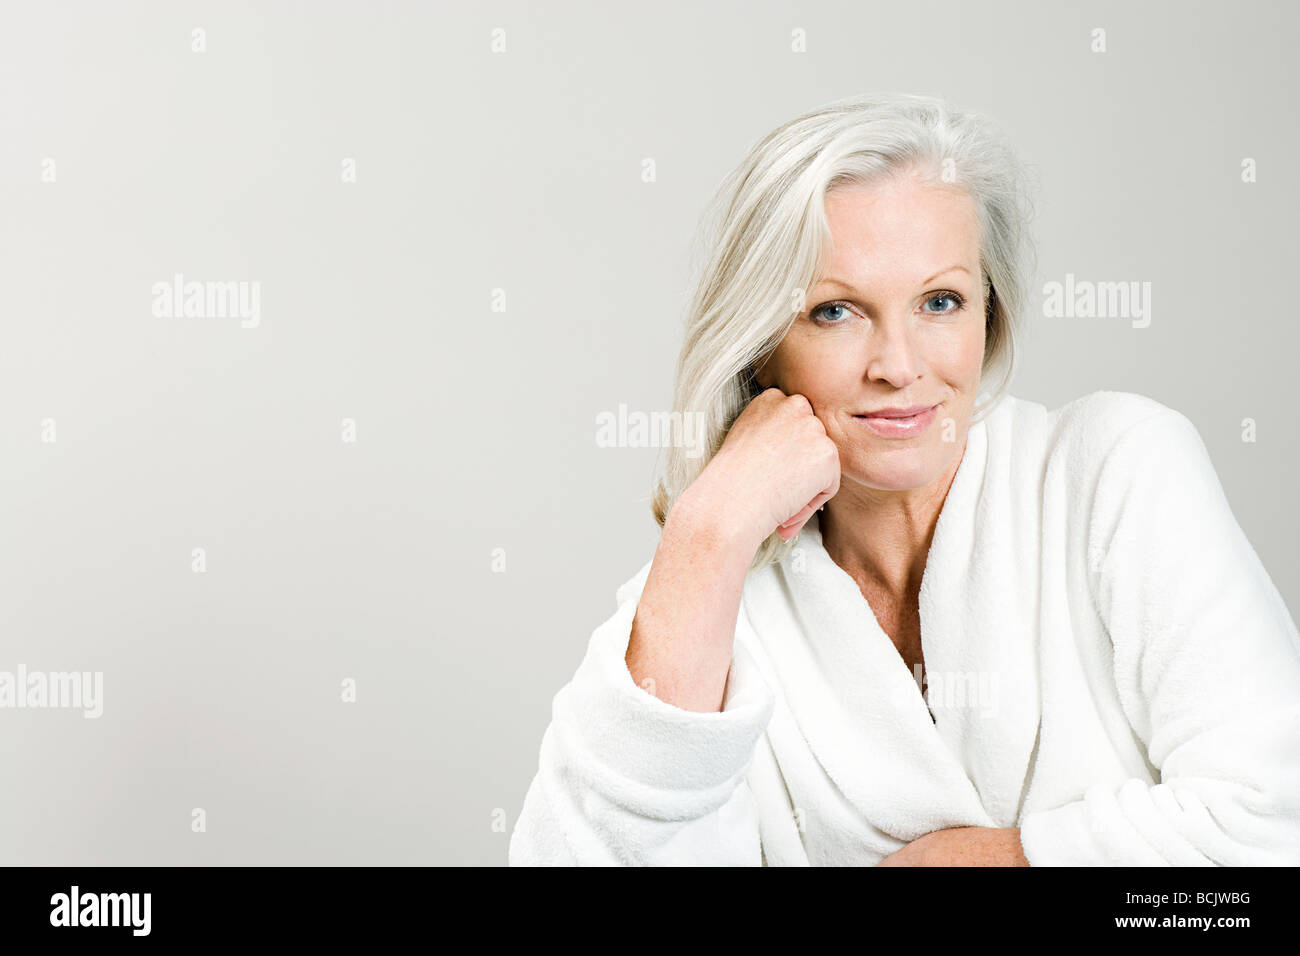 Portrait of middle aged woman wearing bathrobe Stock Photo